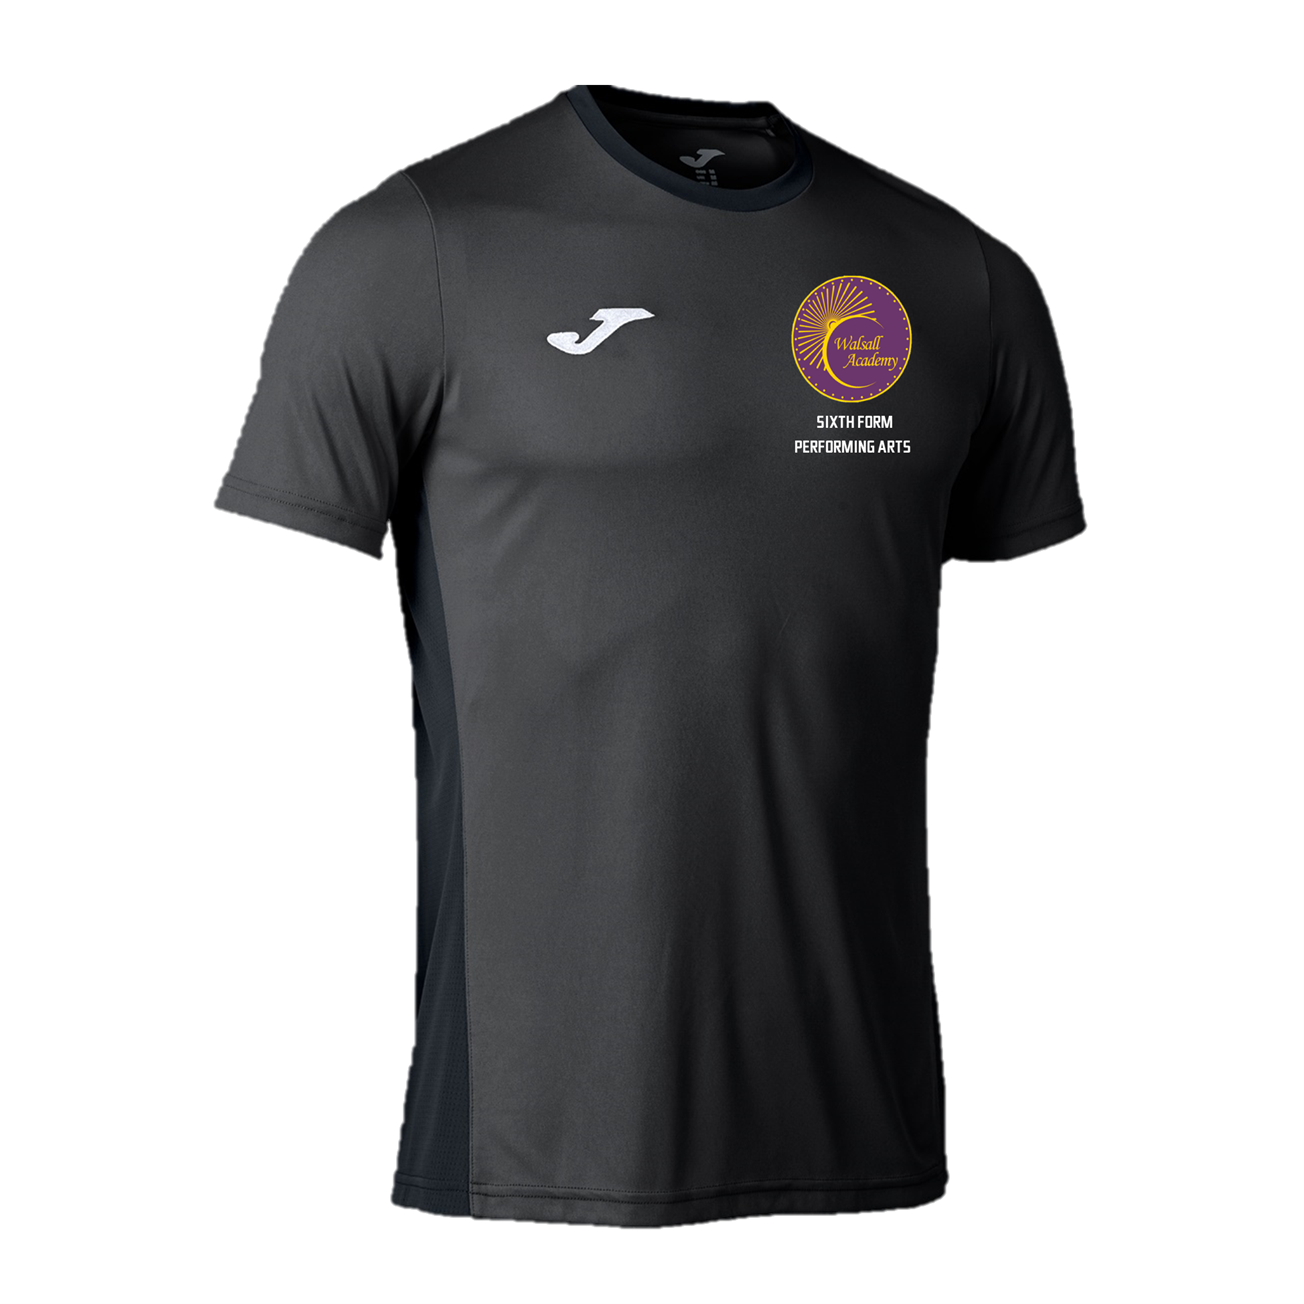 Walsall Academy Sixth Form Performing Arts - T-Shirt